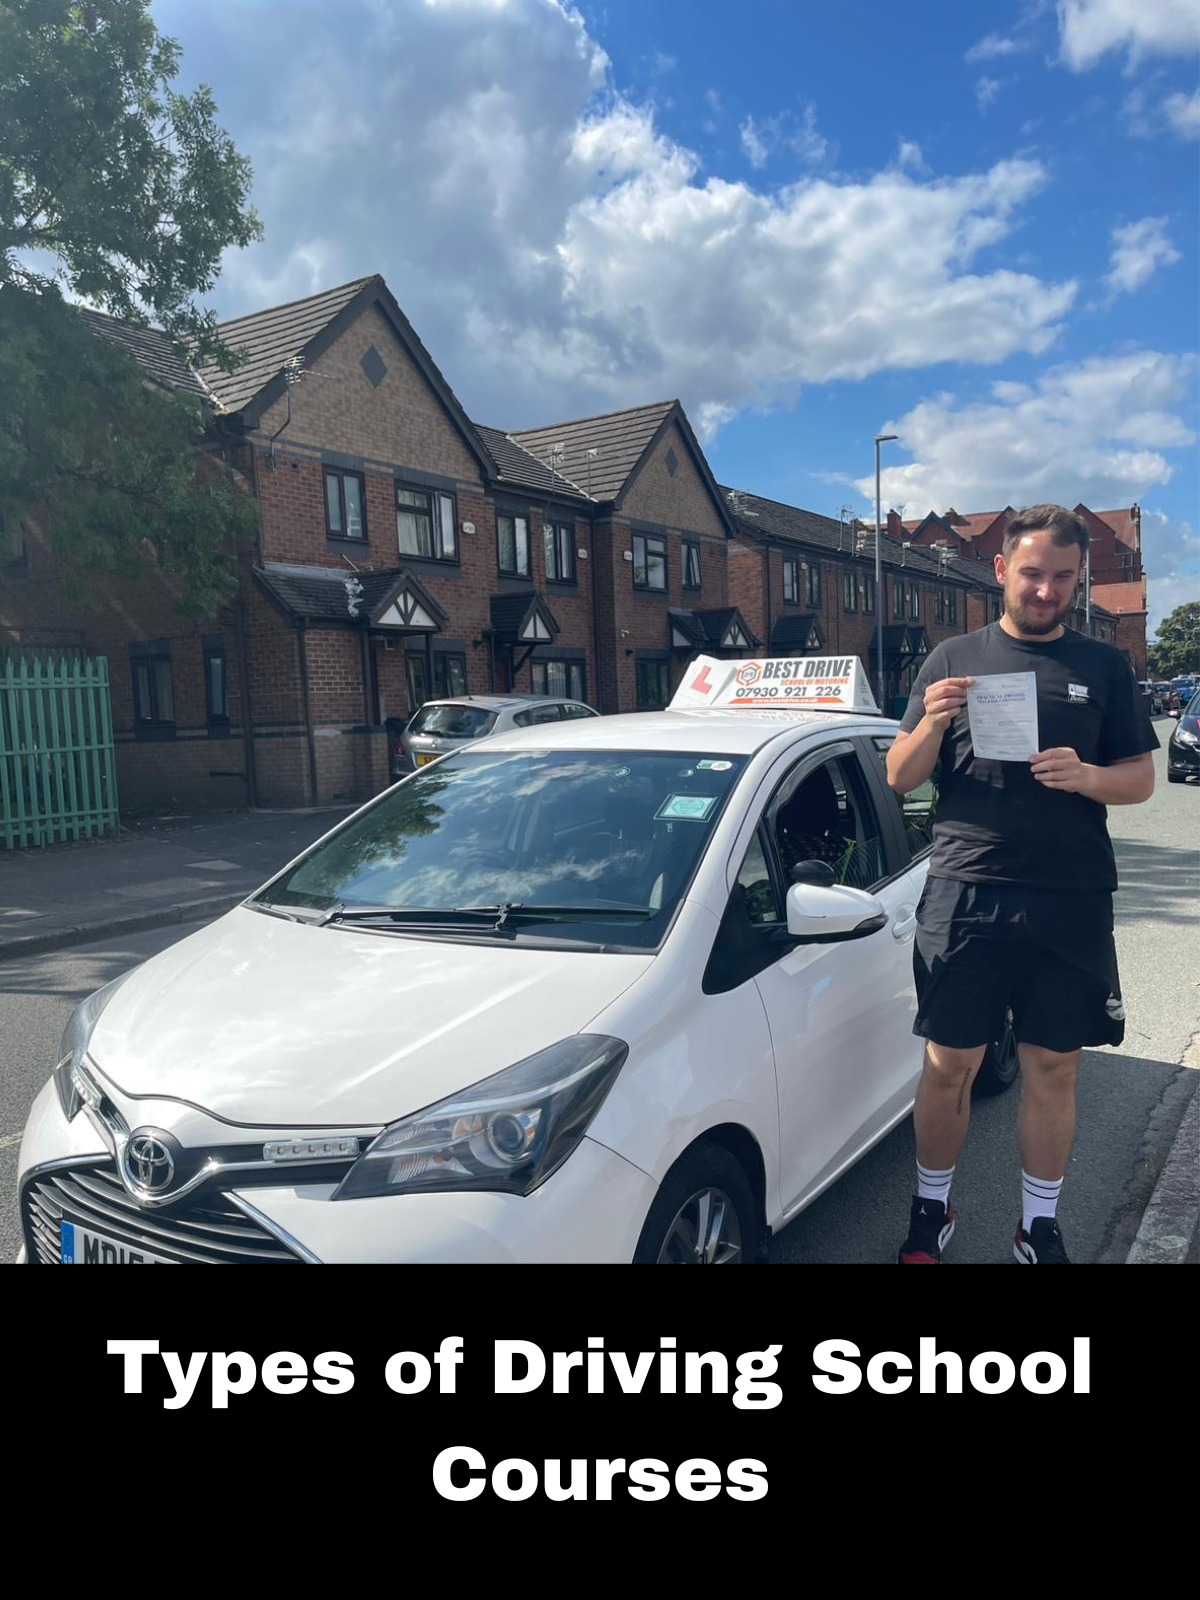 Types of Driving School Courses